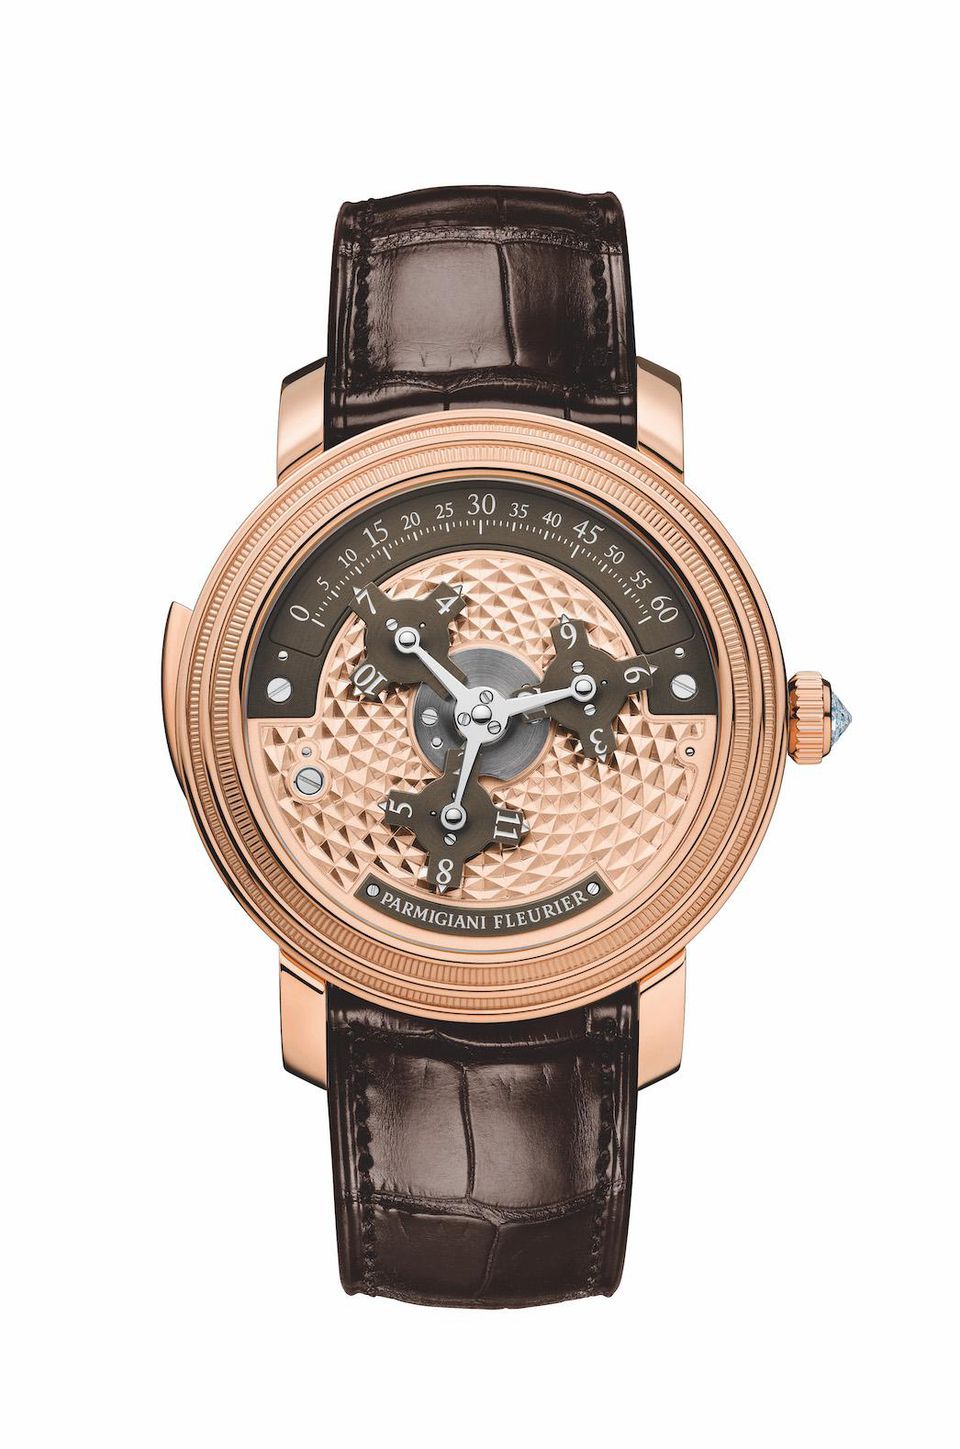  Parmigiani Fleurier Toric Capitole minute repeater watch as seen at SIHH 2019